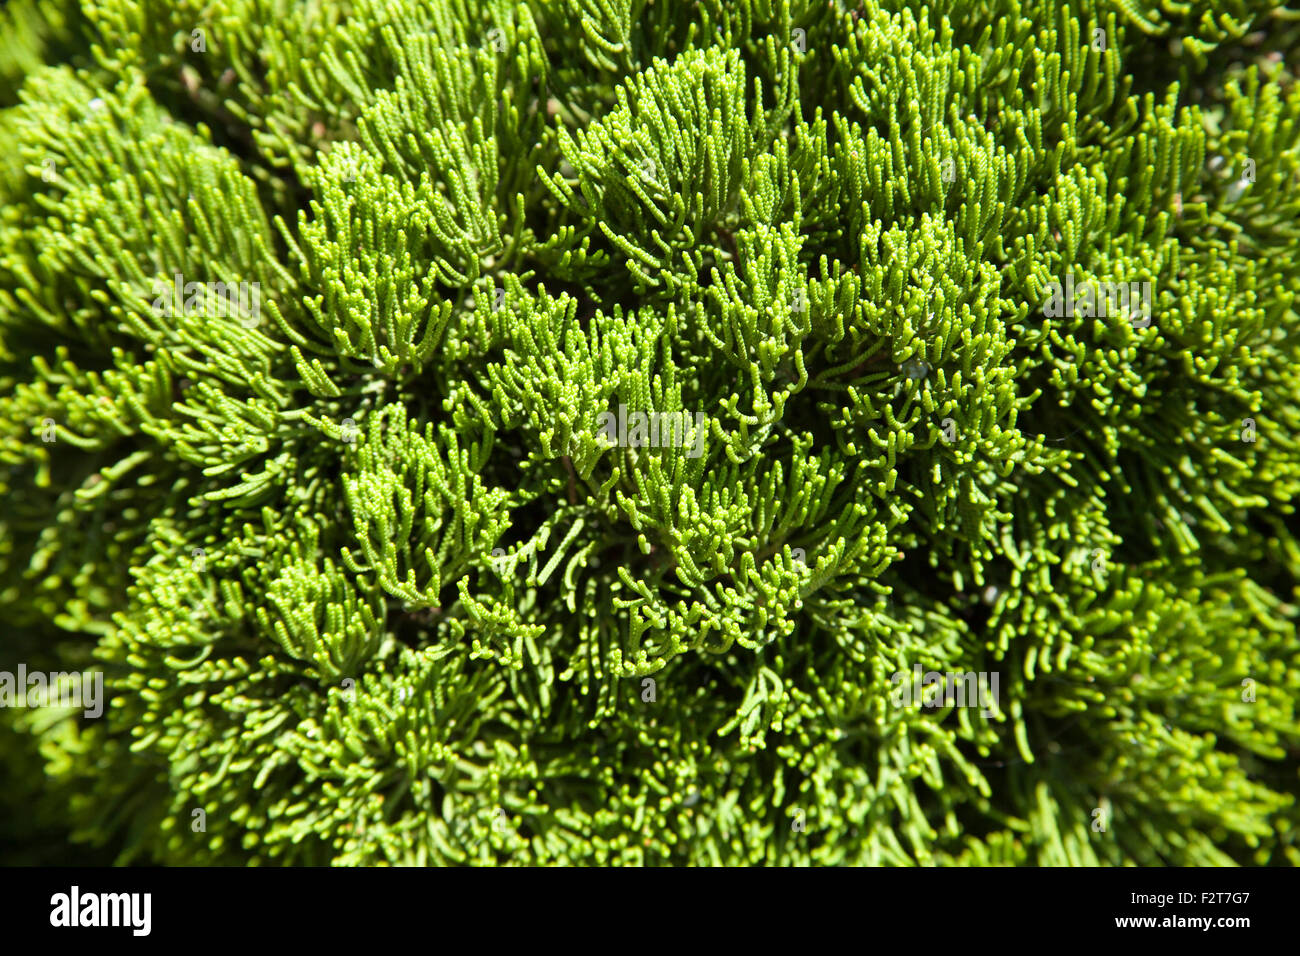 Cypress tree in a small garden Stock Photo